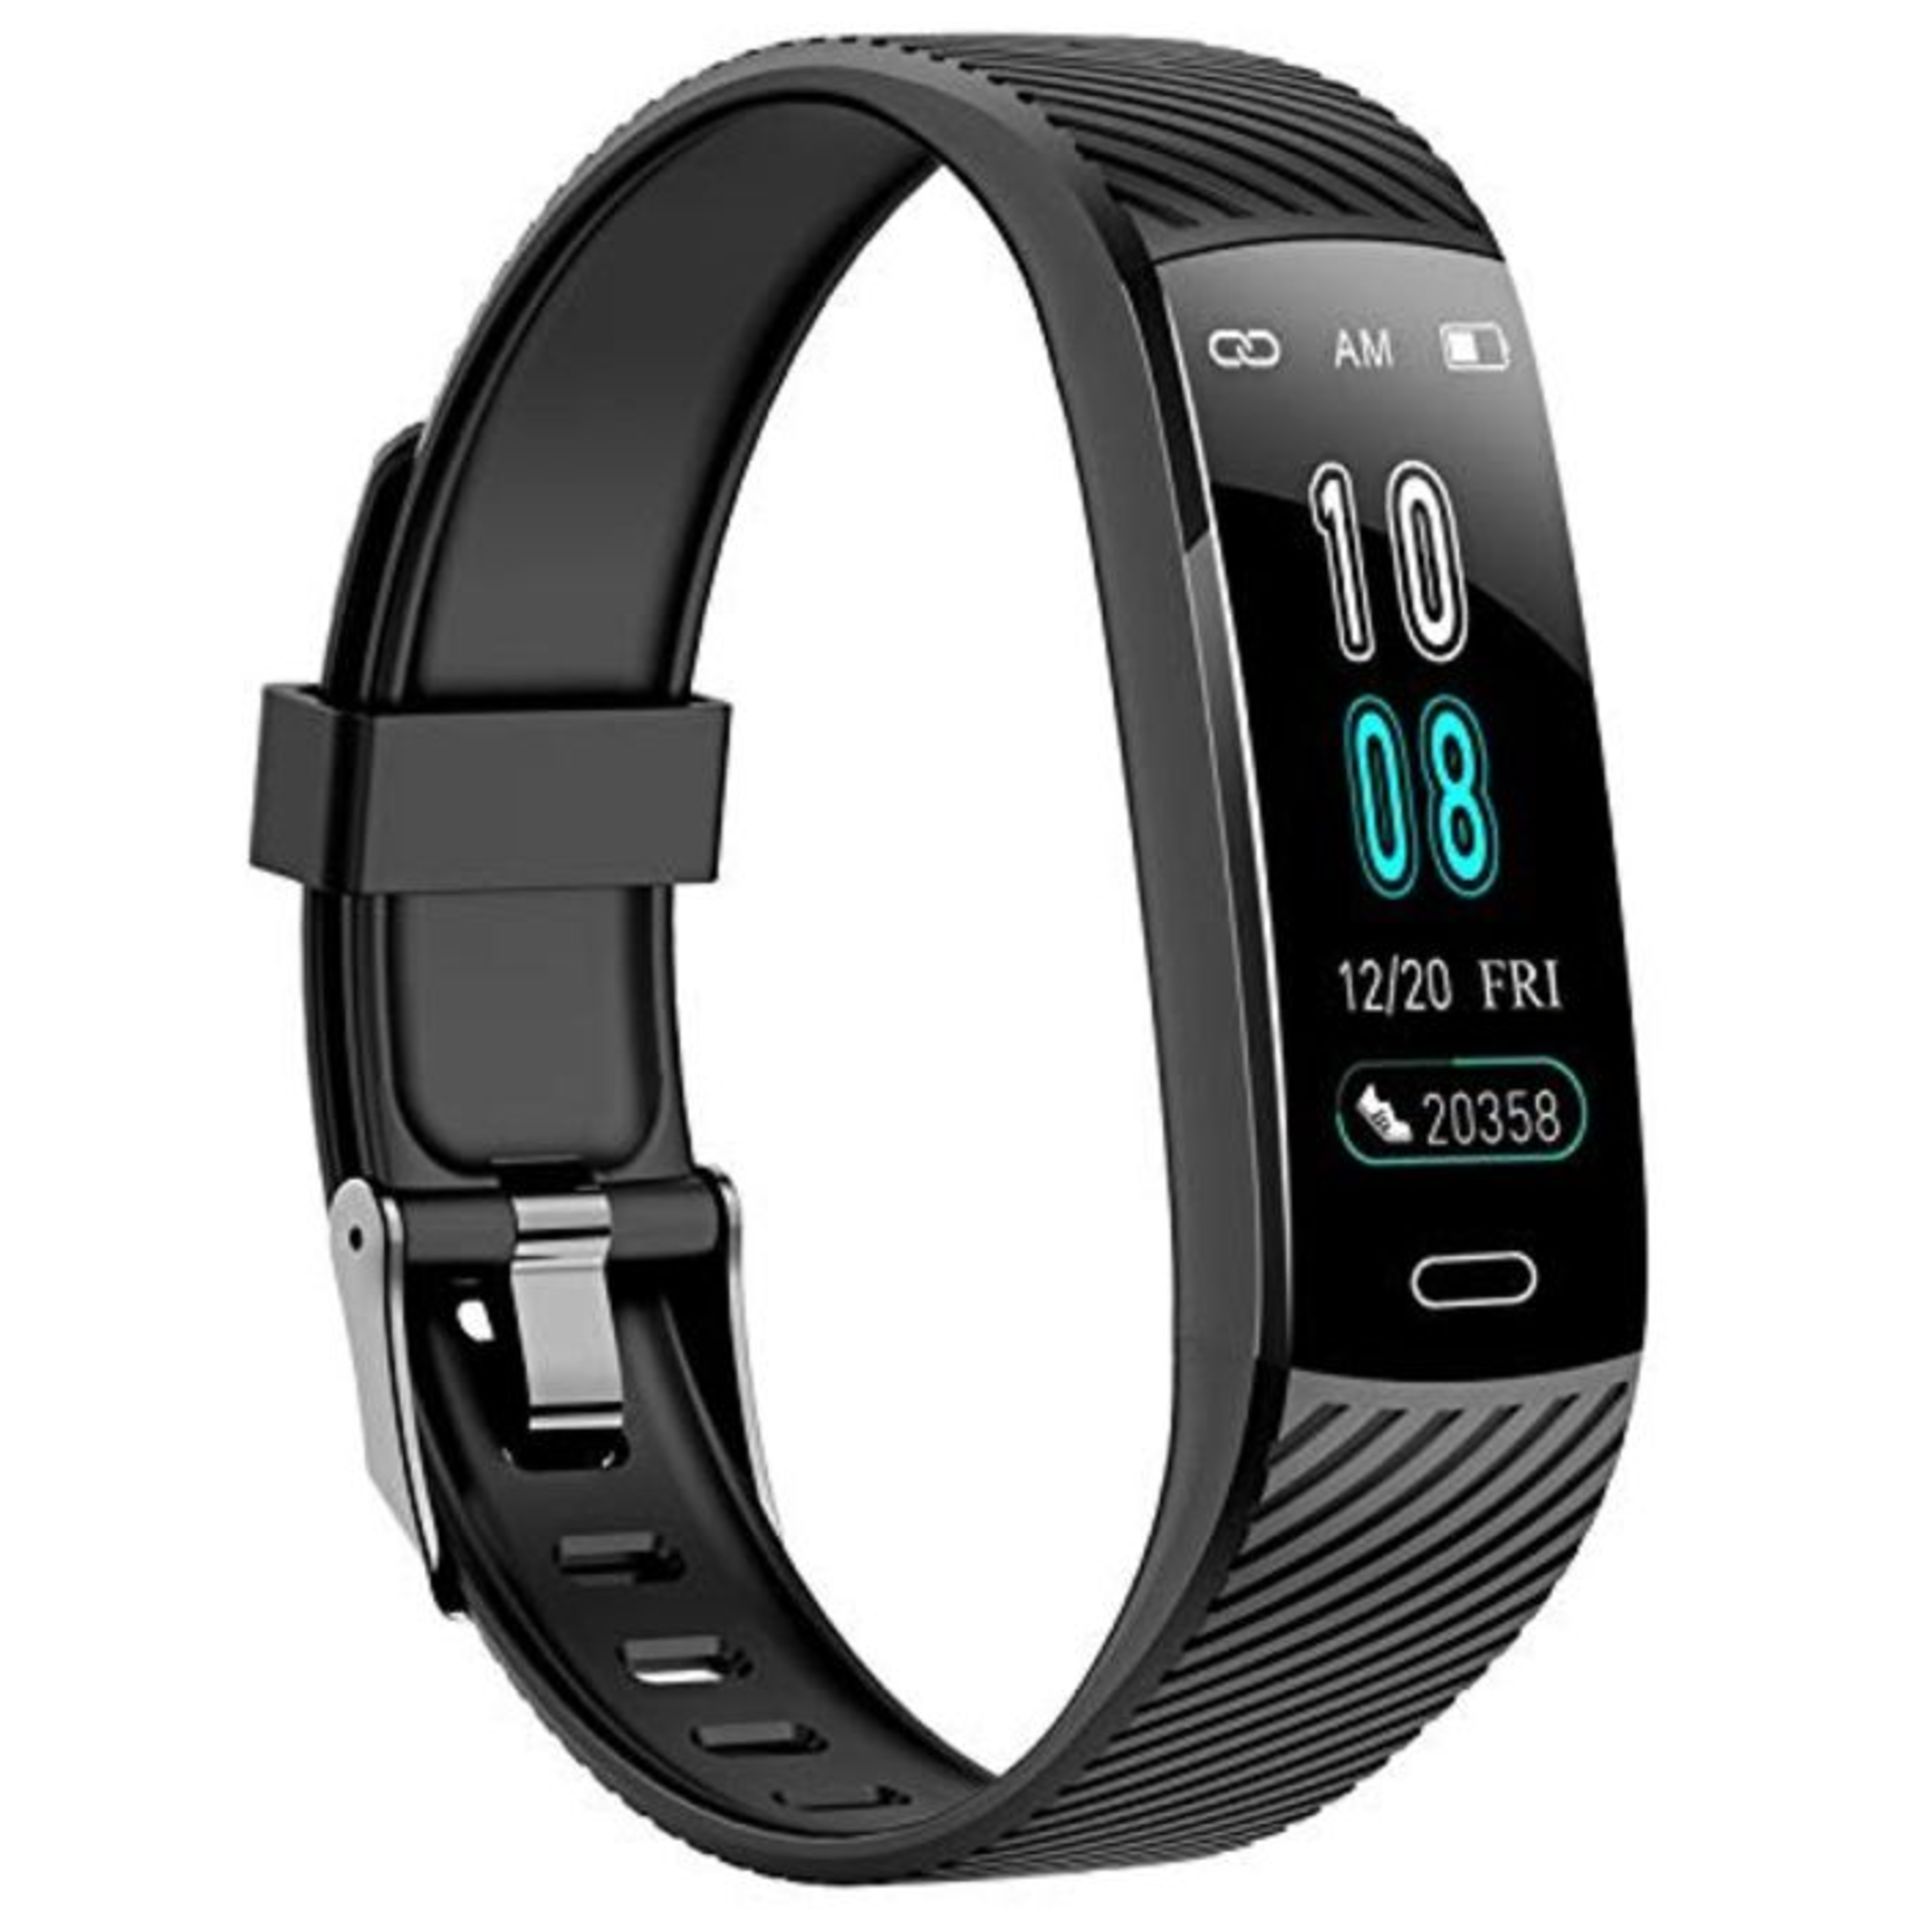 ASWEE Fitness Trackers - Activity Tracker Watch with Heart Rate Blood Pressure Monitor